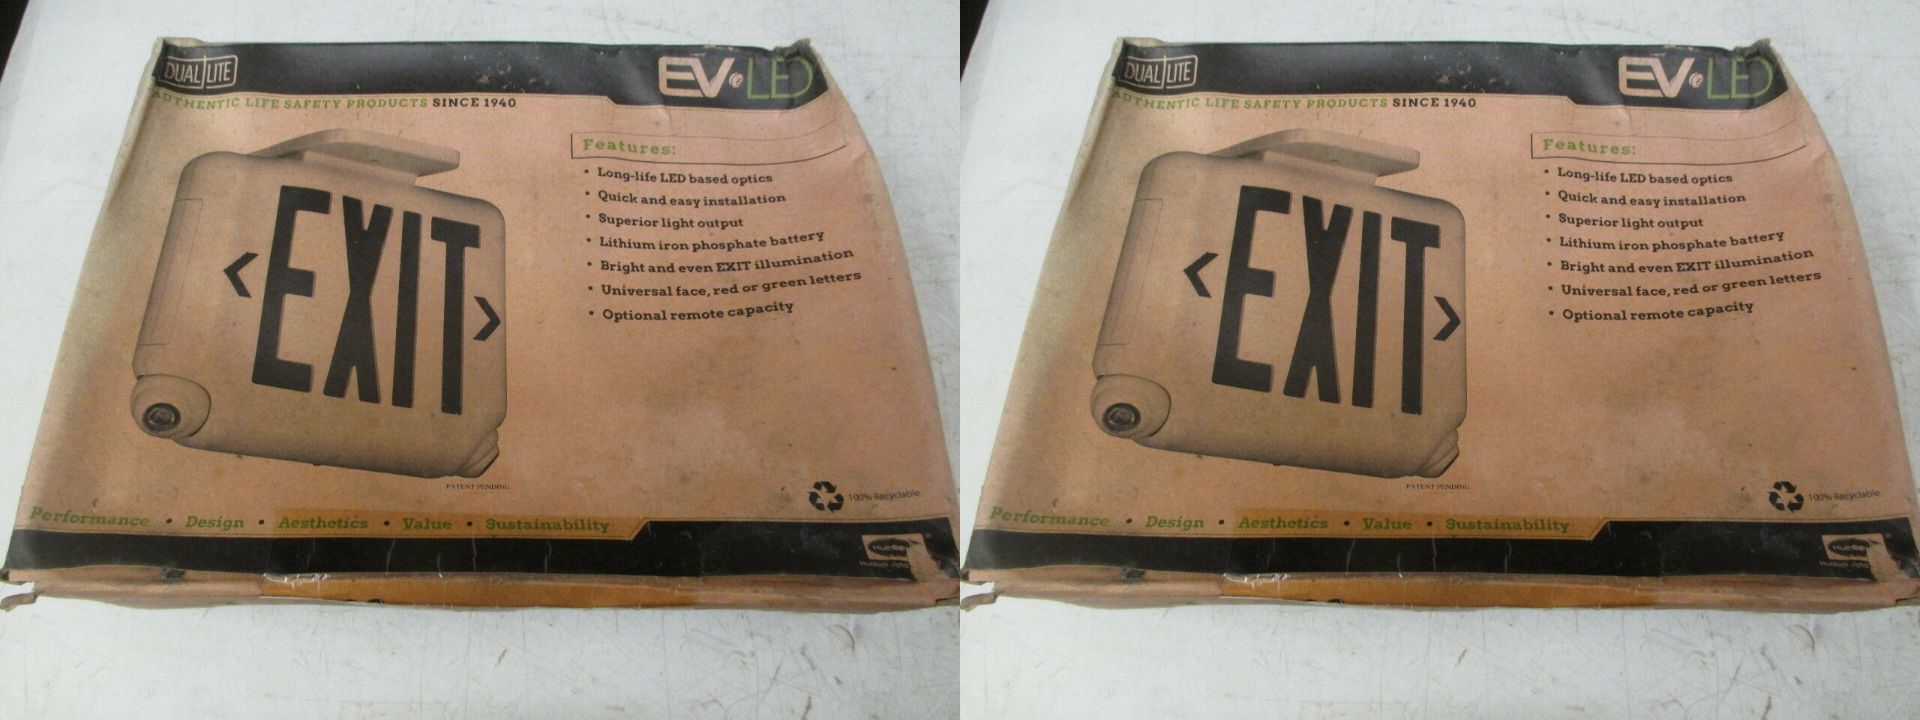 DUAL-LITE EVCURWDI-0-WM Exit Sign P/N 93060026, Lot of 2, New Old Stock